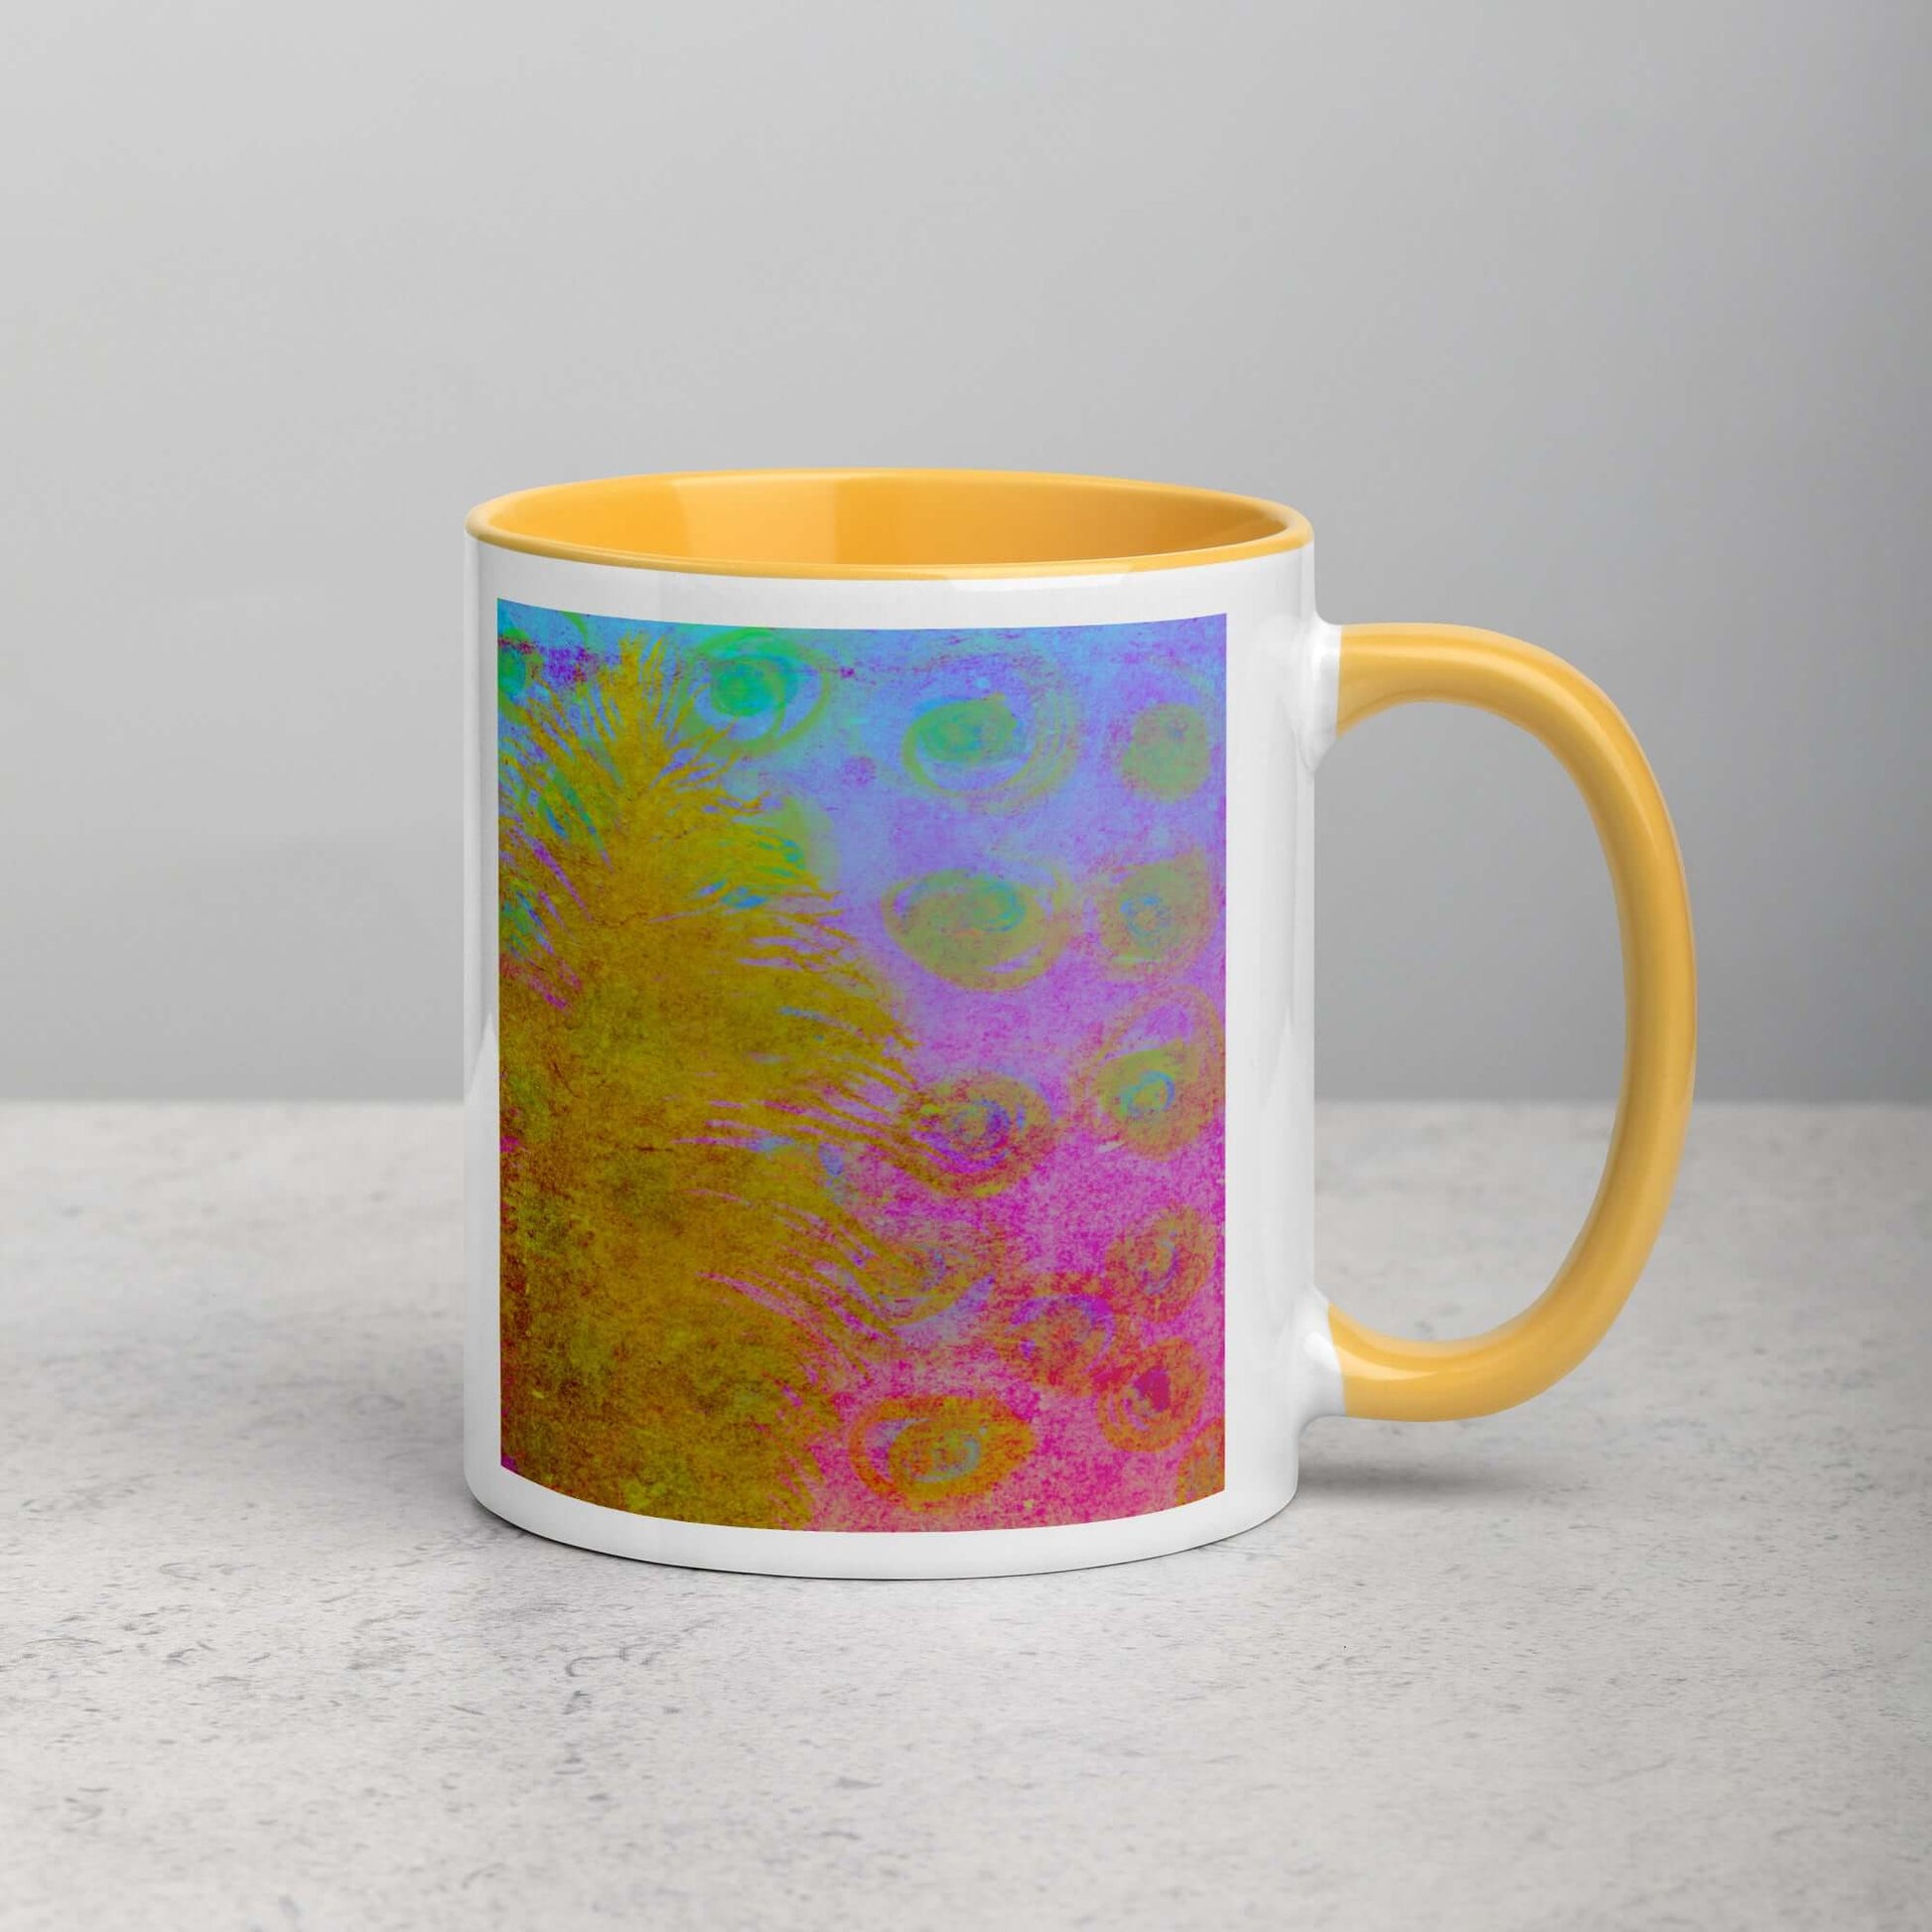 Golden Feather Pink and Blue “Fantasia” Abstract Art Mug with Golden Yellow Color Inside Right Handed Front View